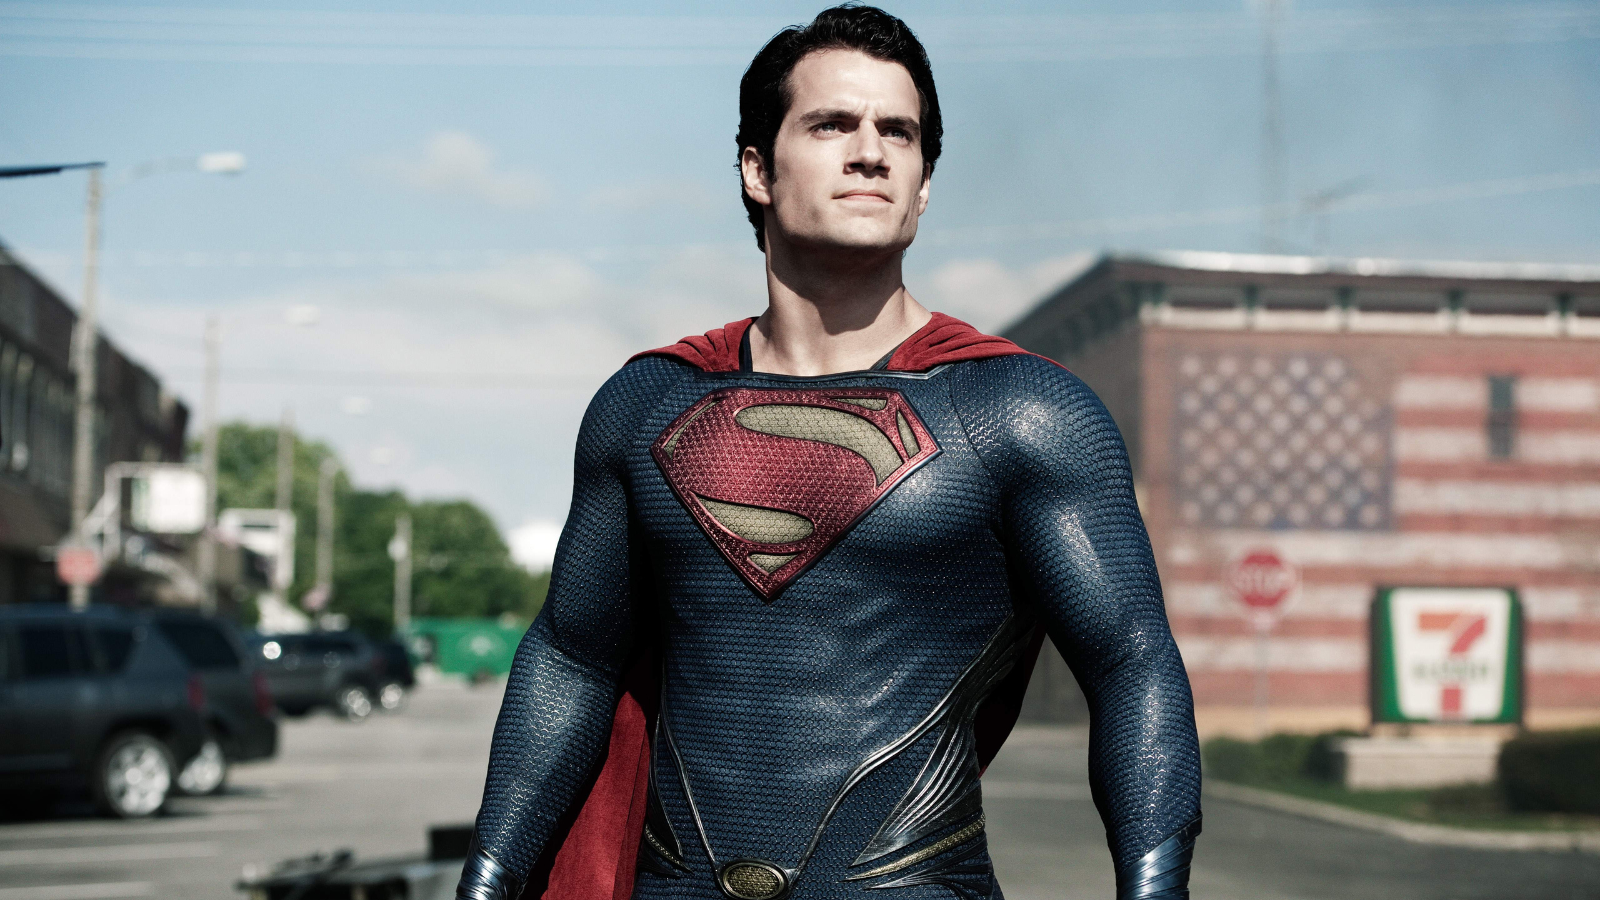 Superman (Henry Cavill) stands defiantly in the middle of a street in 'Man of Steel' (2013).